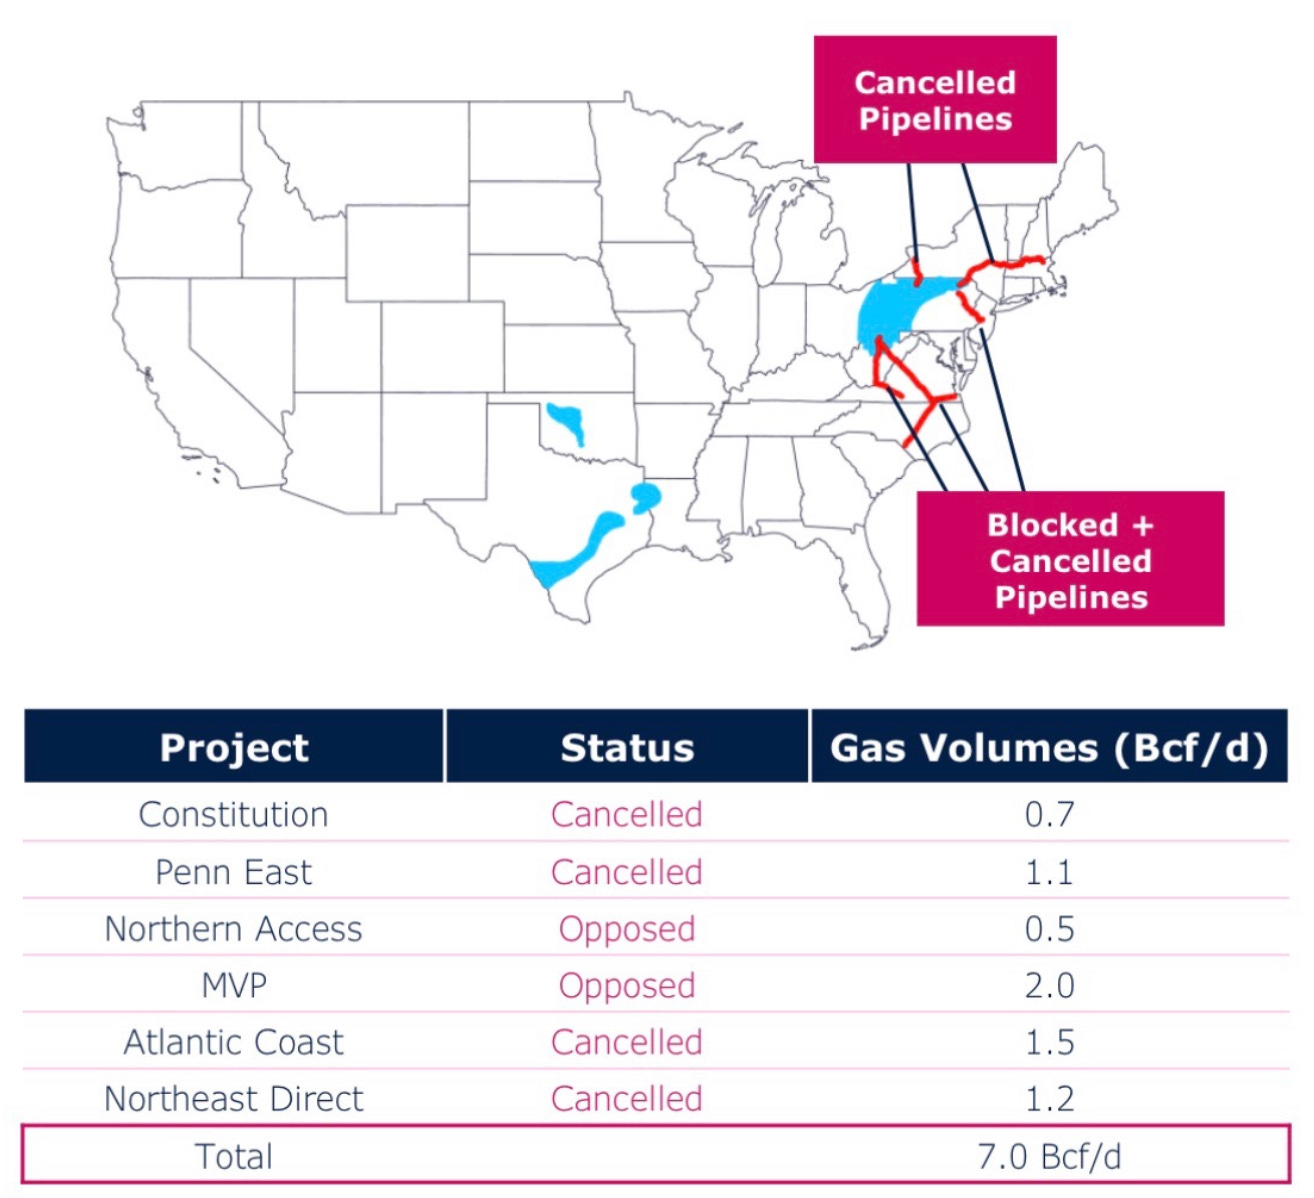 Cancelled pipelines